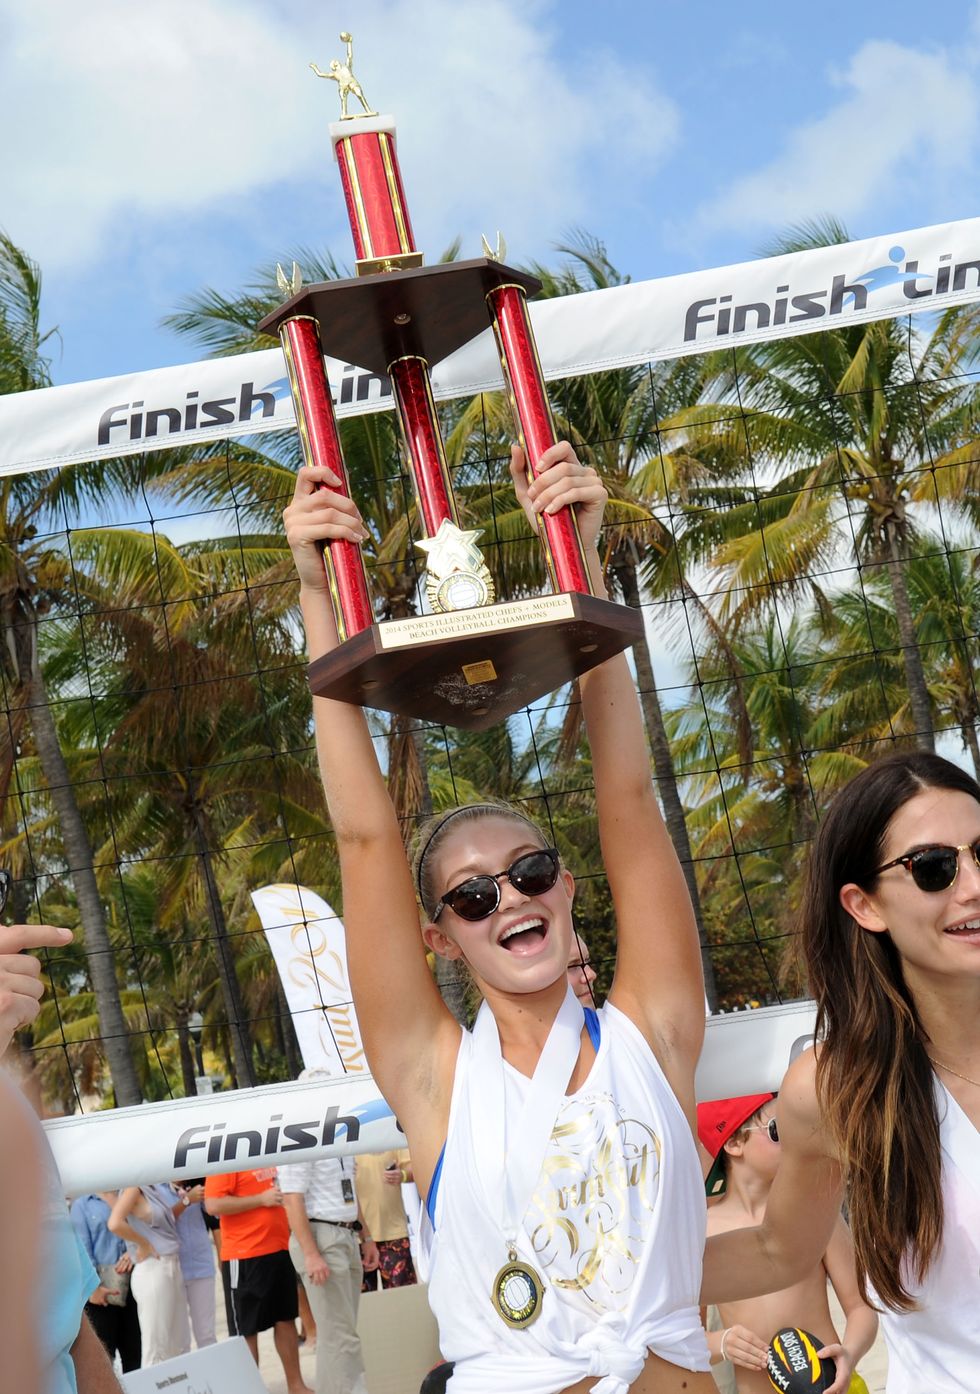 Gigi Hadid lifts trophy at Sports Illustrated Swimsuit 2014 Beach Volleyball game | ELLE UK